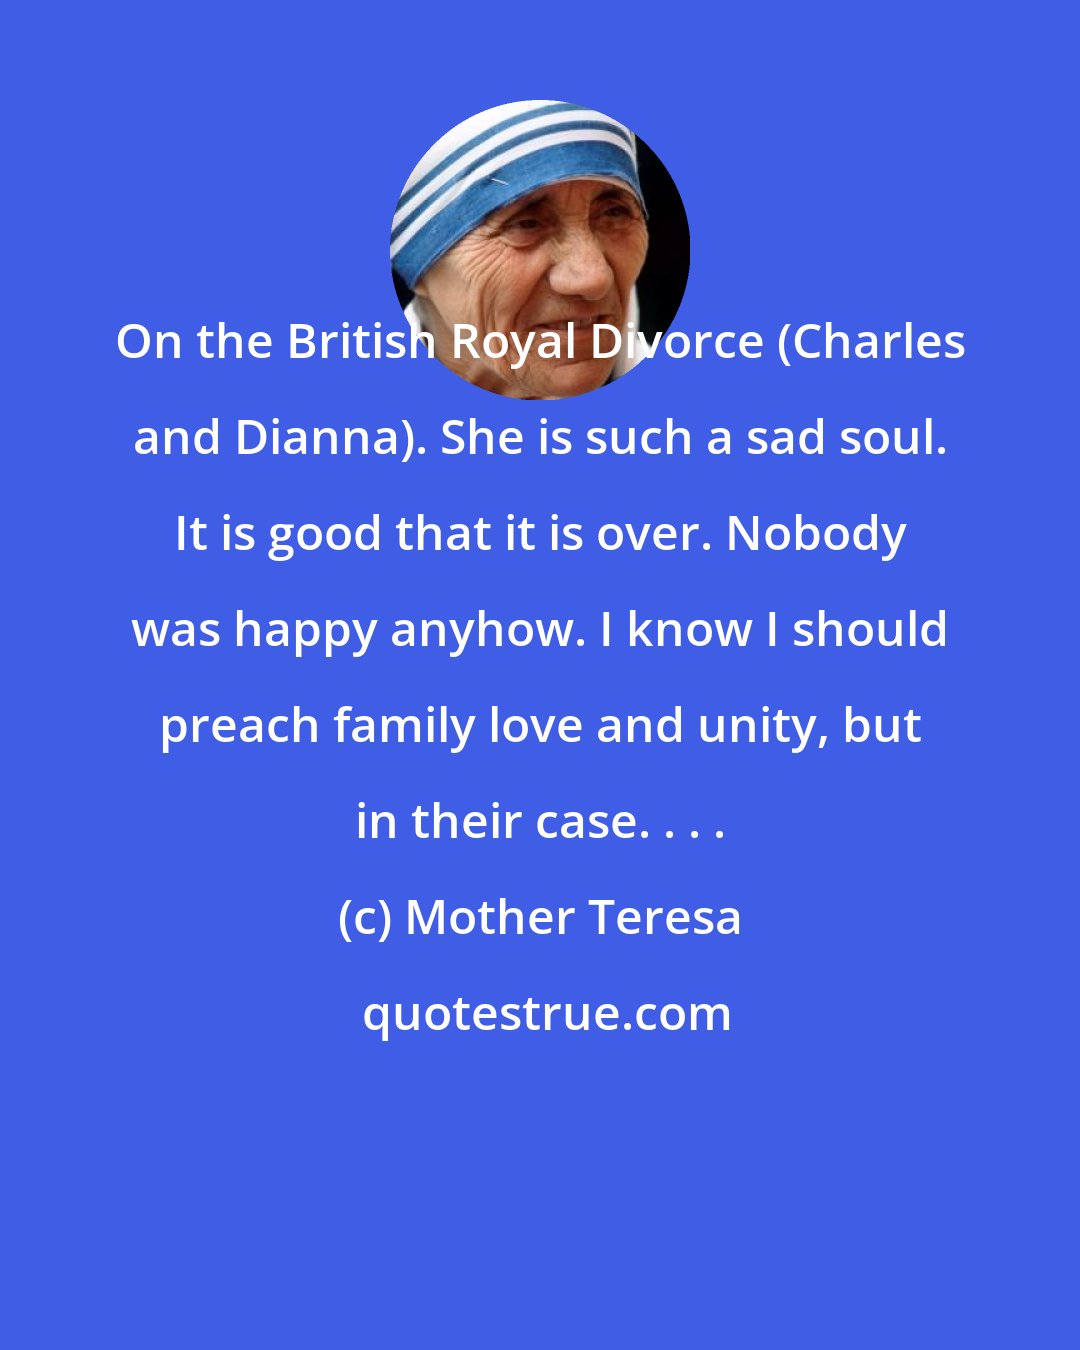 Mother Teresa: On the British Royal Divorce (Charles and Dianna). She is such a sad soul. It is good that it is over. Nobody was happy anyhow. I know I should preach family love and unity, but in their case. . . .